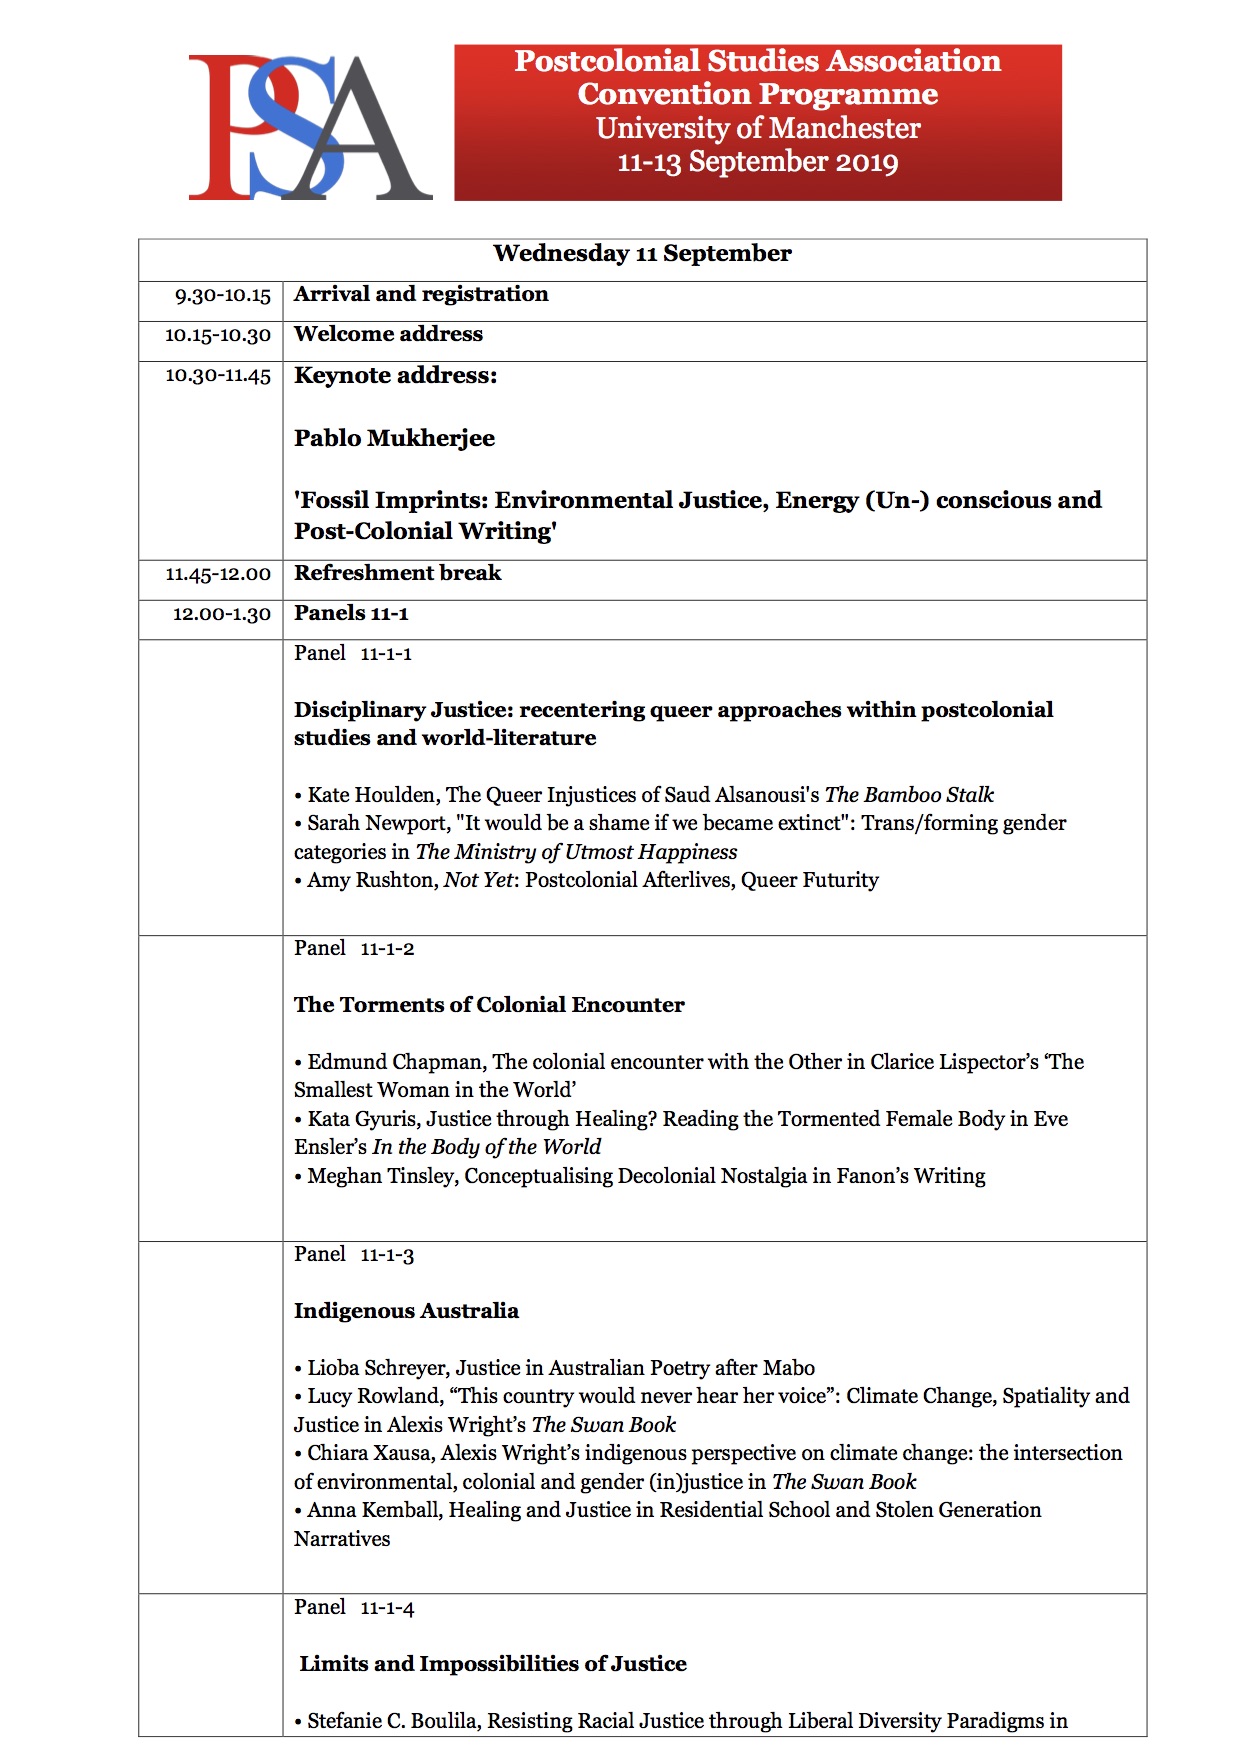 2019 Convention Programme